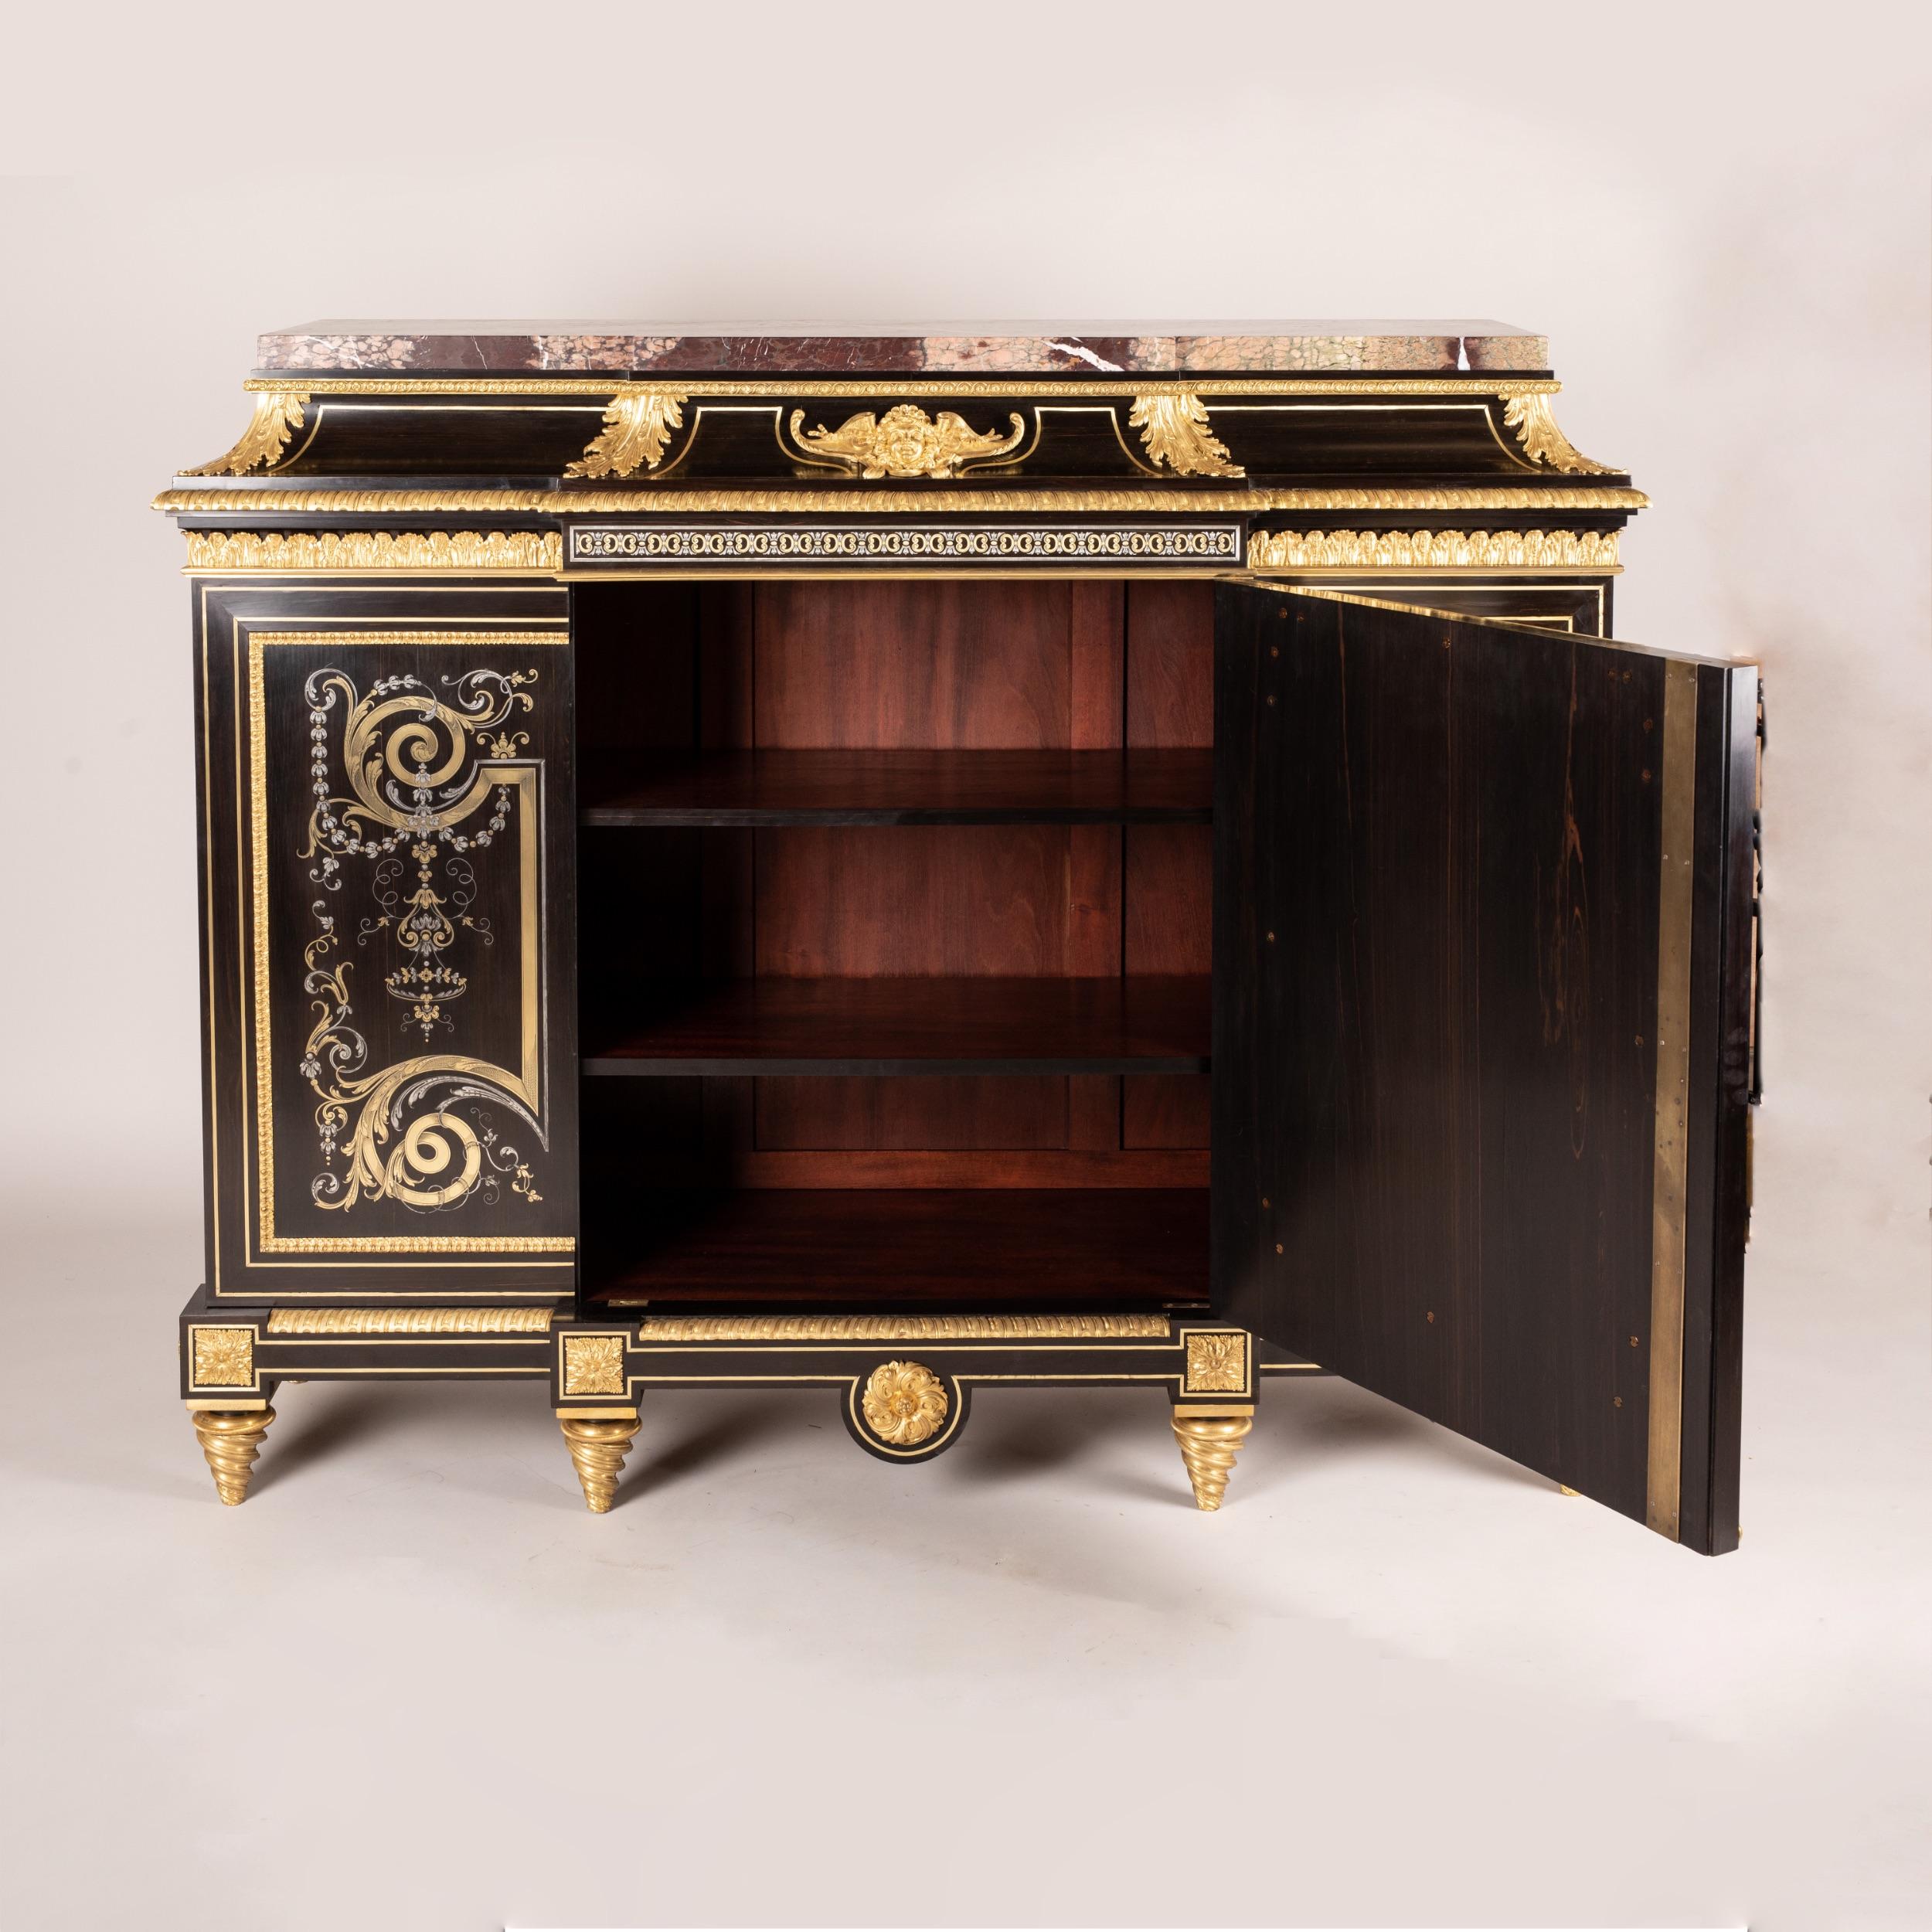 An impressive Marquetry Inlaid cabinet
In the Louis XIV Manner of André-Charles Boulle

Constructed in ebony and ormolu, adorned in première-partie inlay work of engraved brass and pewter; rising from tapering toursade feet; the breakfront façade